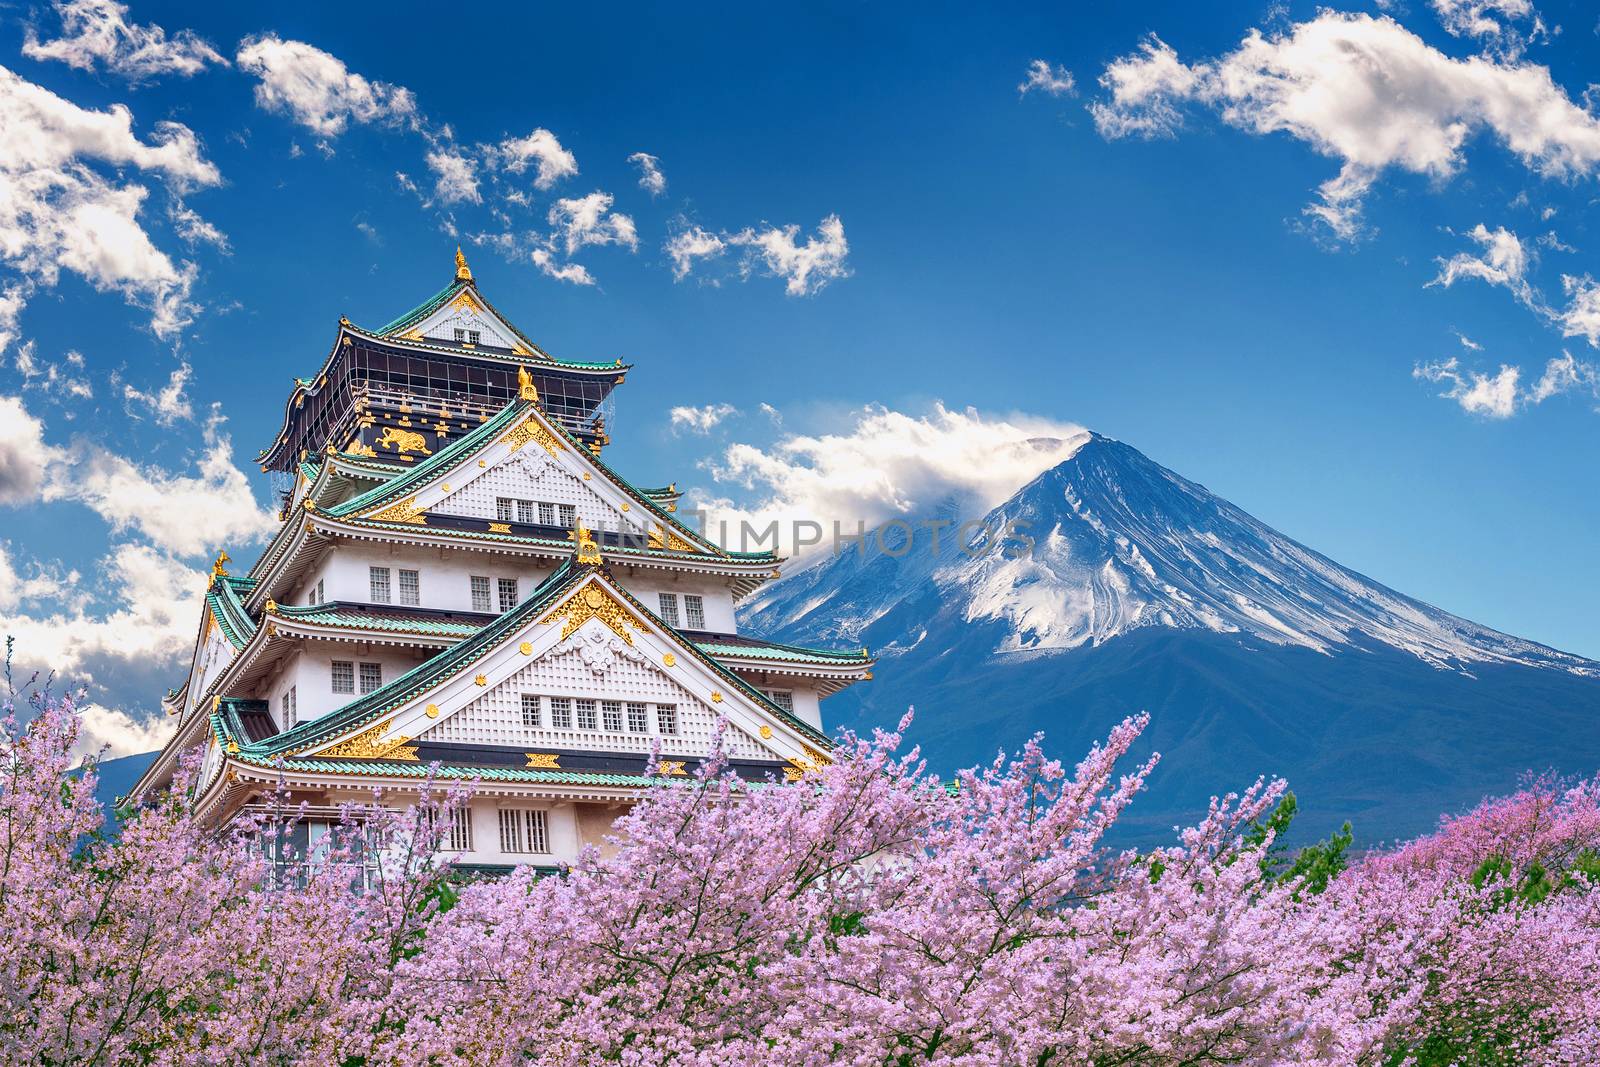 Fuji mountains and castle with cherry blossom in spring.